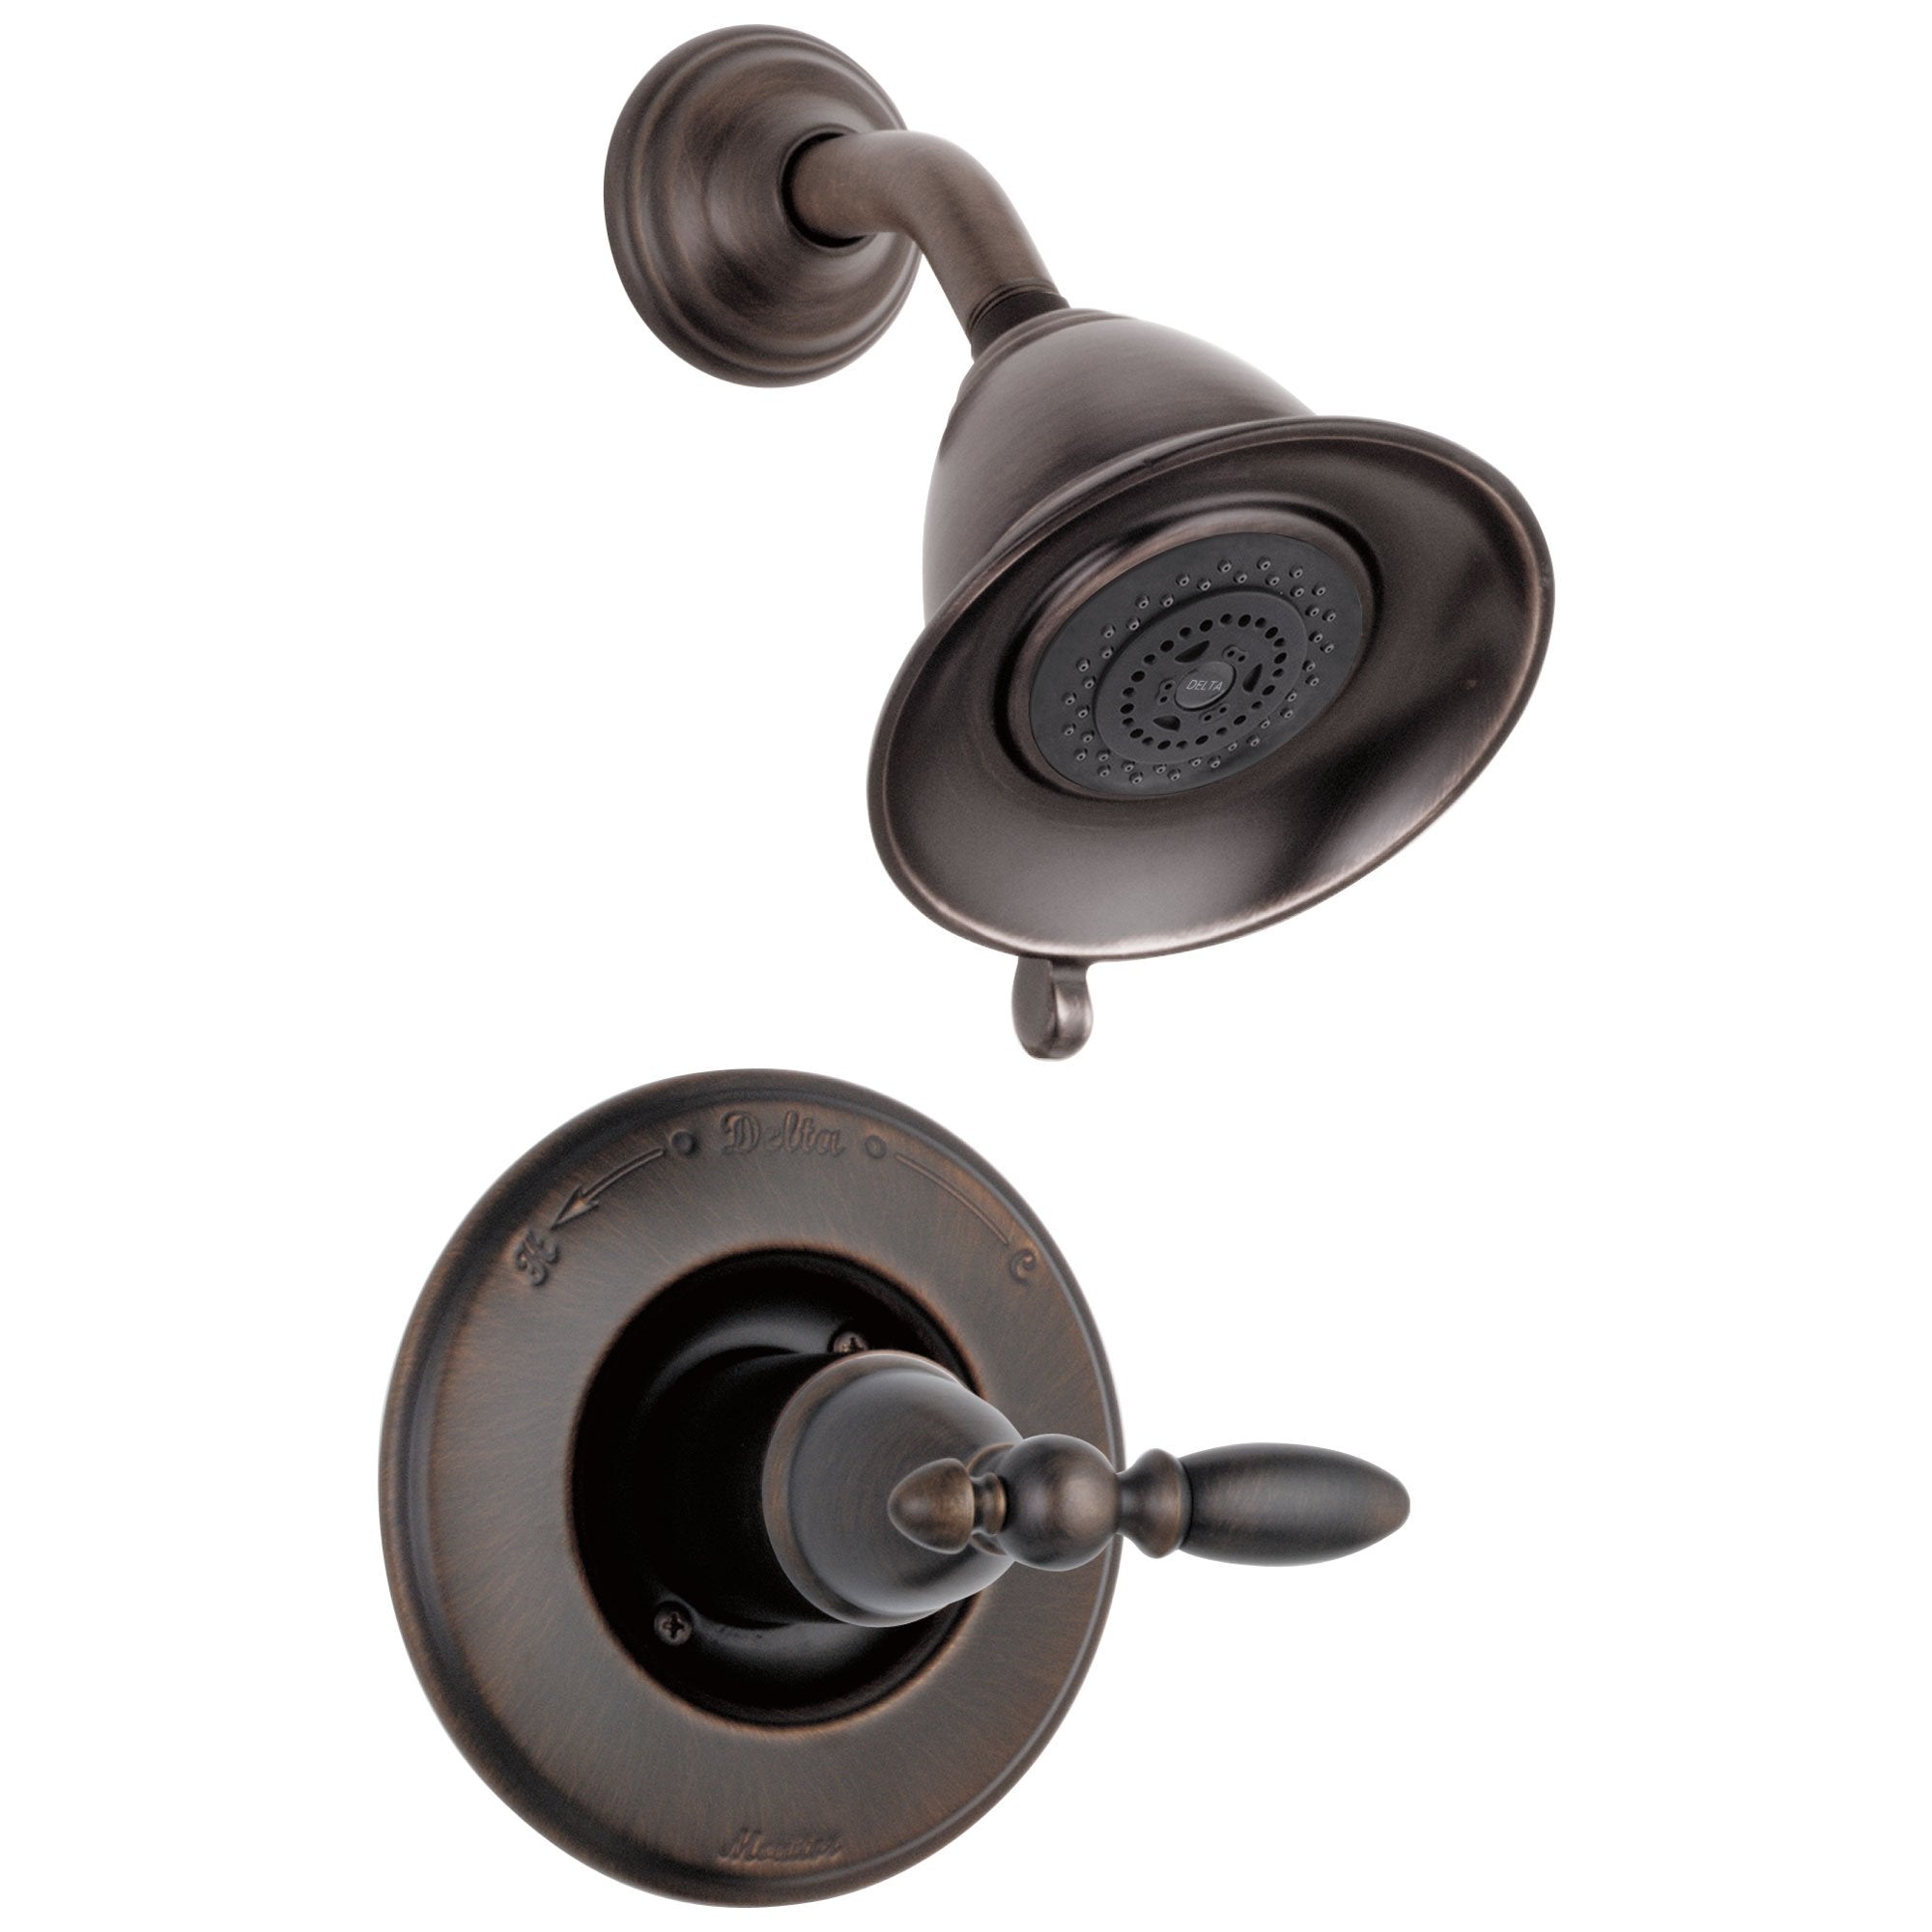 Delta Victorian Collection Venetian Bronze Traditional Style Monitor 14 Shower Faucet INCLUDES Single Lever Handle and Rough-Valve without Stops D1556V